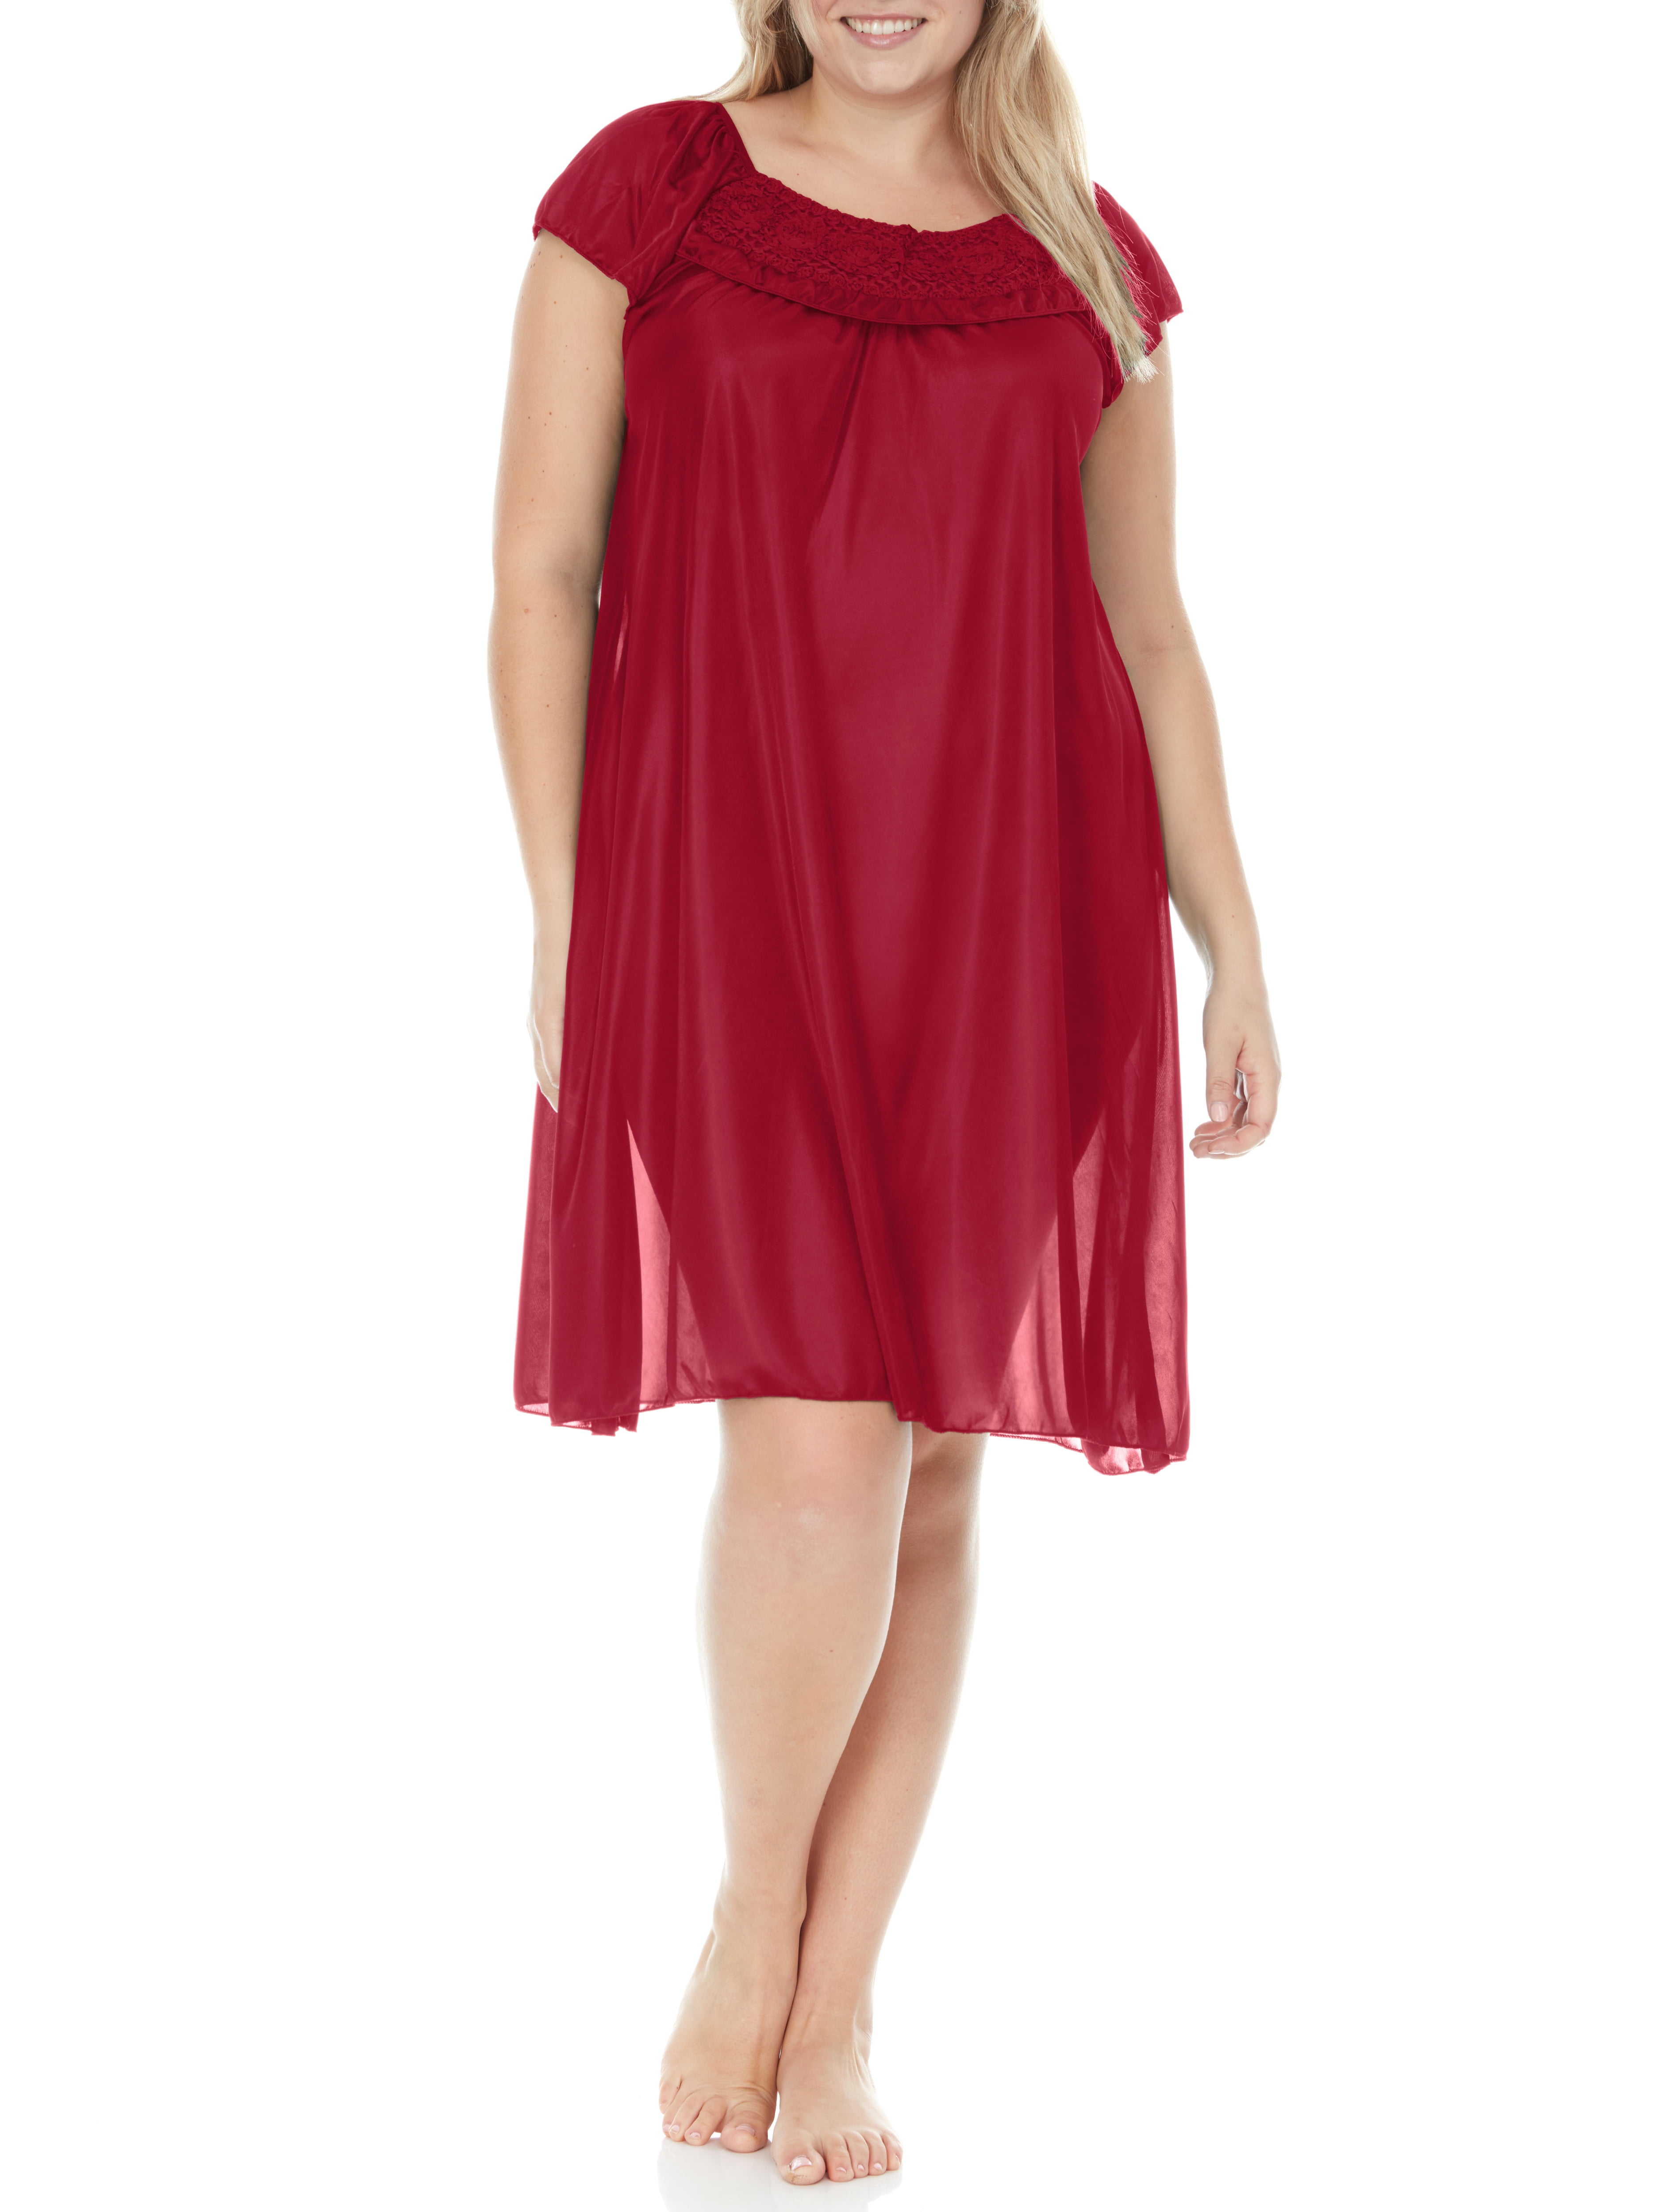 EZI Satin Nightgowns for Women - Soft & Breathable Knee-Length